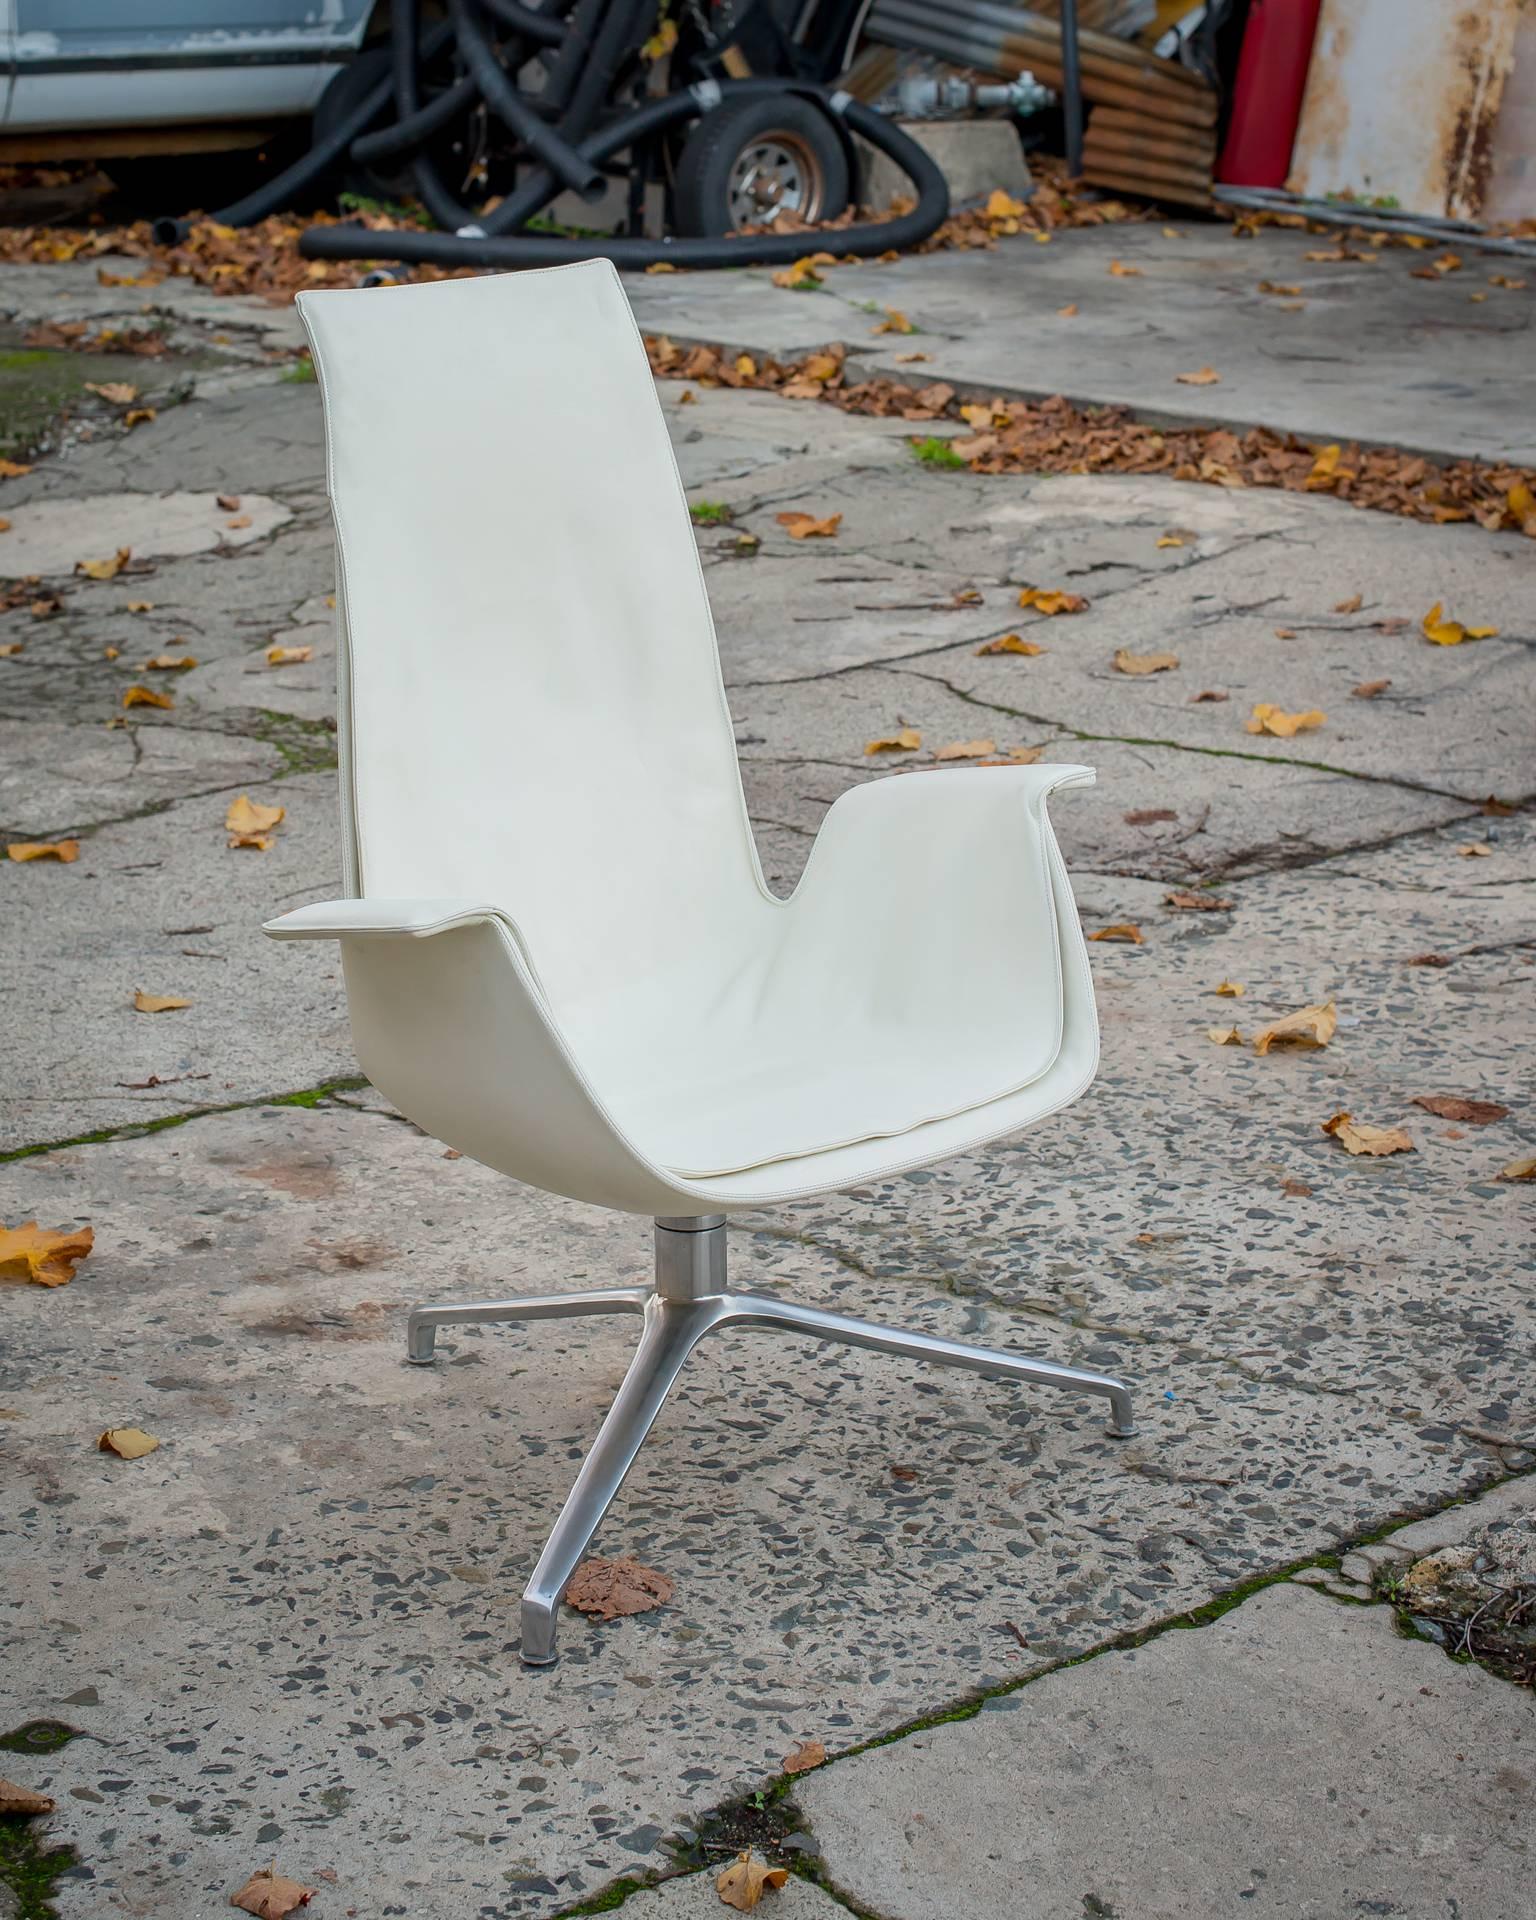 Vintage Midcentury Modern Fabricius Kastholm Arm Chair
Vintage lounger in Bone White leather by Preben Fabricius and Jørgen Kastholm  
Designed in 1964 for Alfred Kill International, Denmark
Flawless all-original condition with healthy latex,